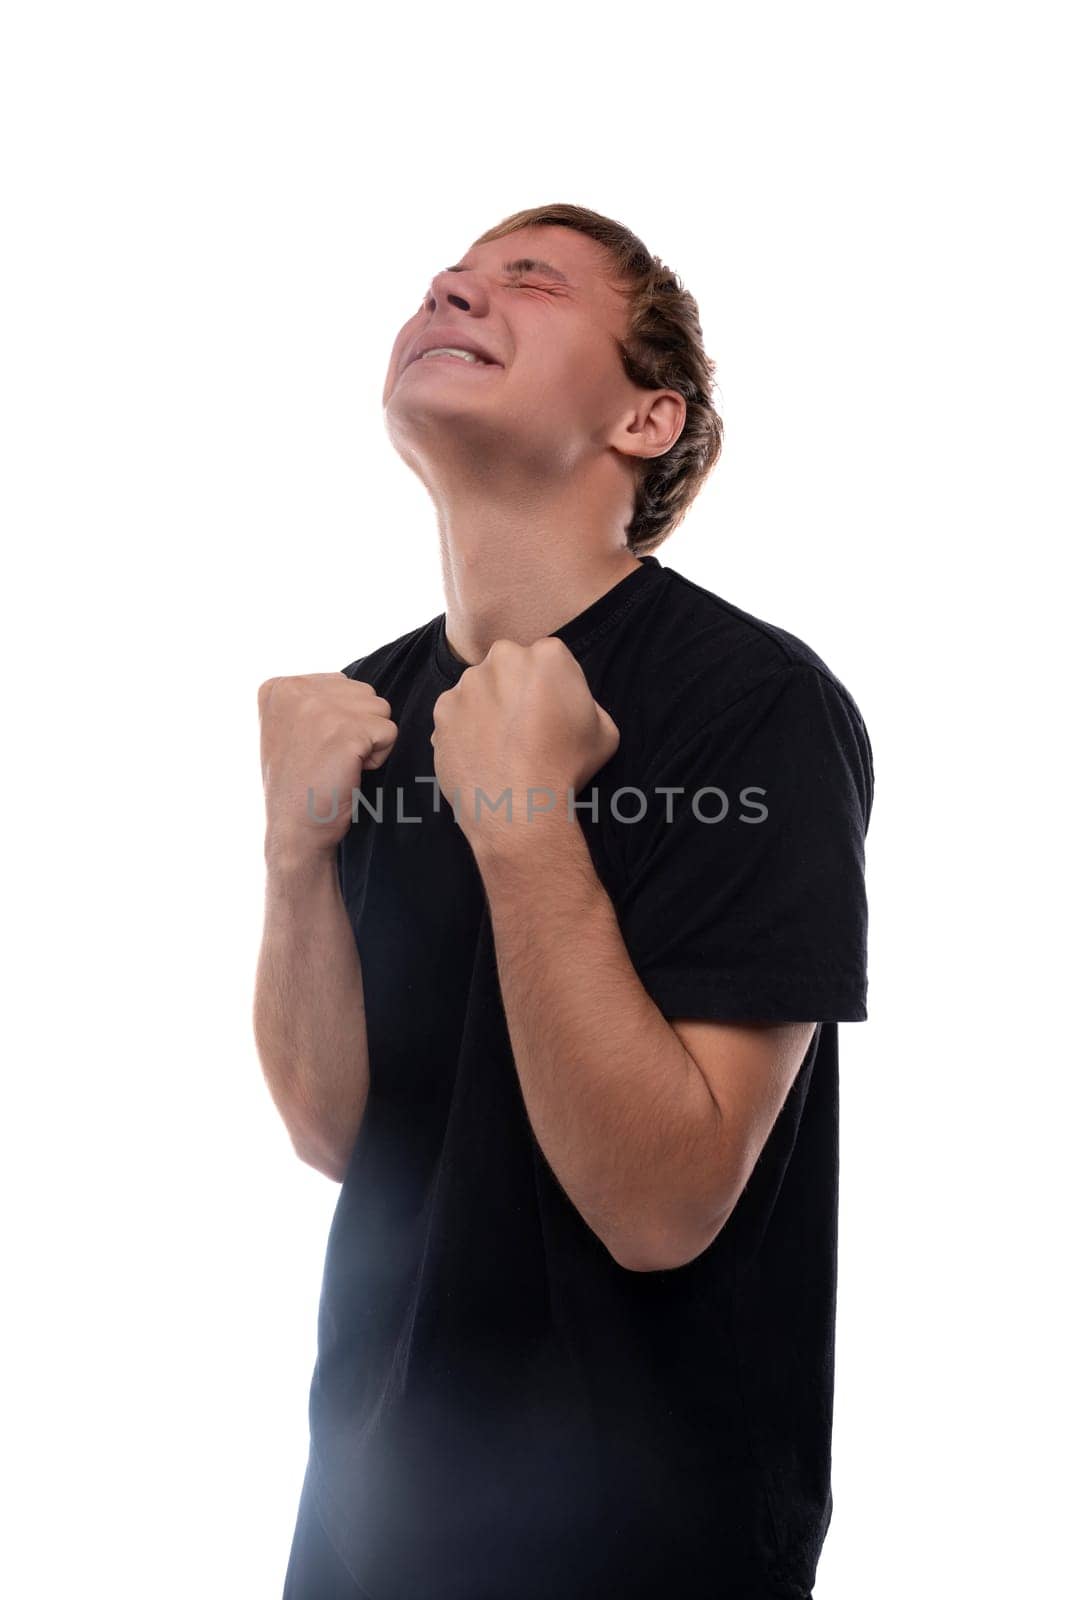 Cute teenage guy with blond hair dressed in a black T-shirt hoping for good luck.